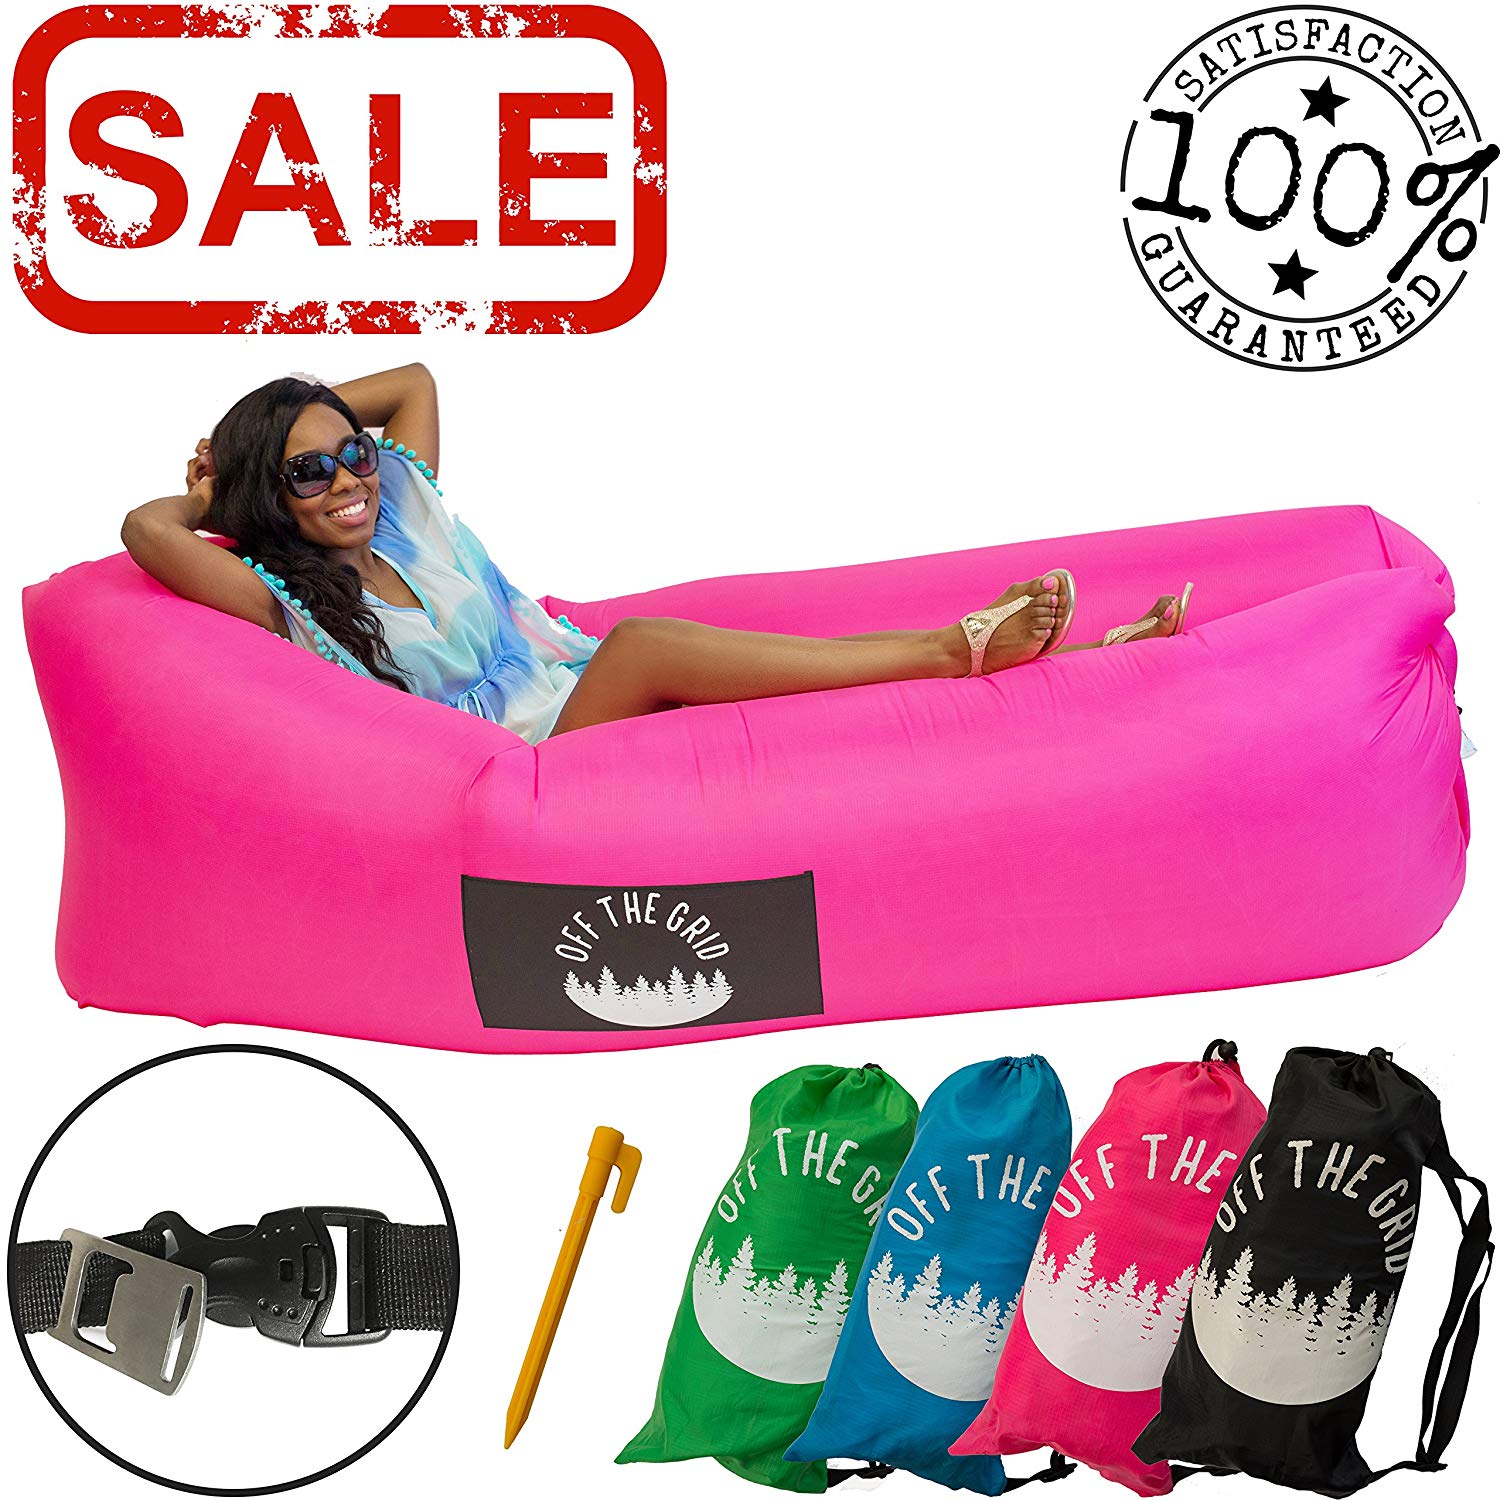 Off the Grid Inflatable Lounger - Air Sofa Wind Chair Hammock - Floating/Portable Bed